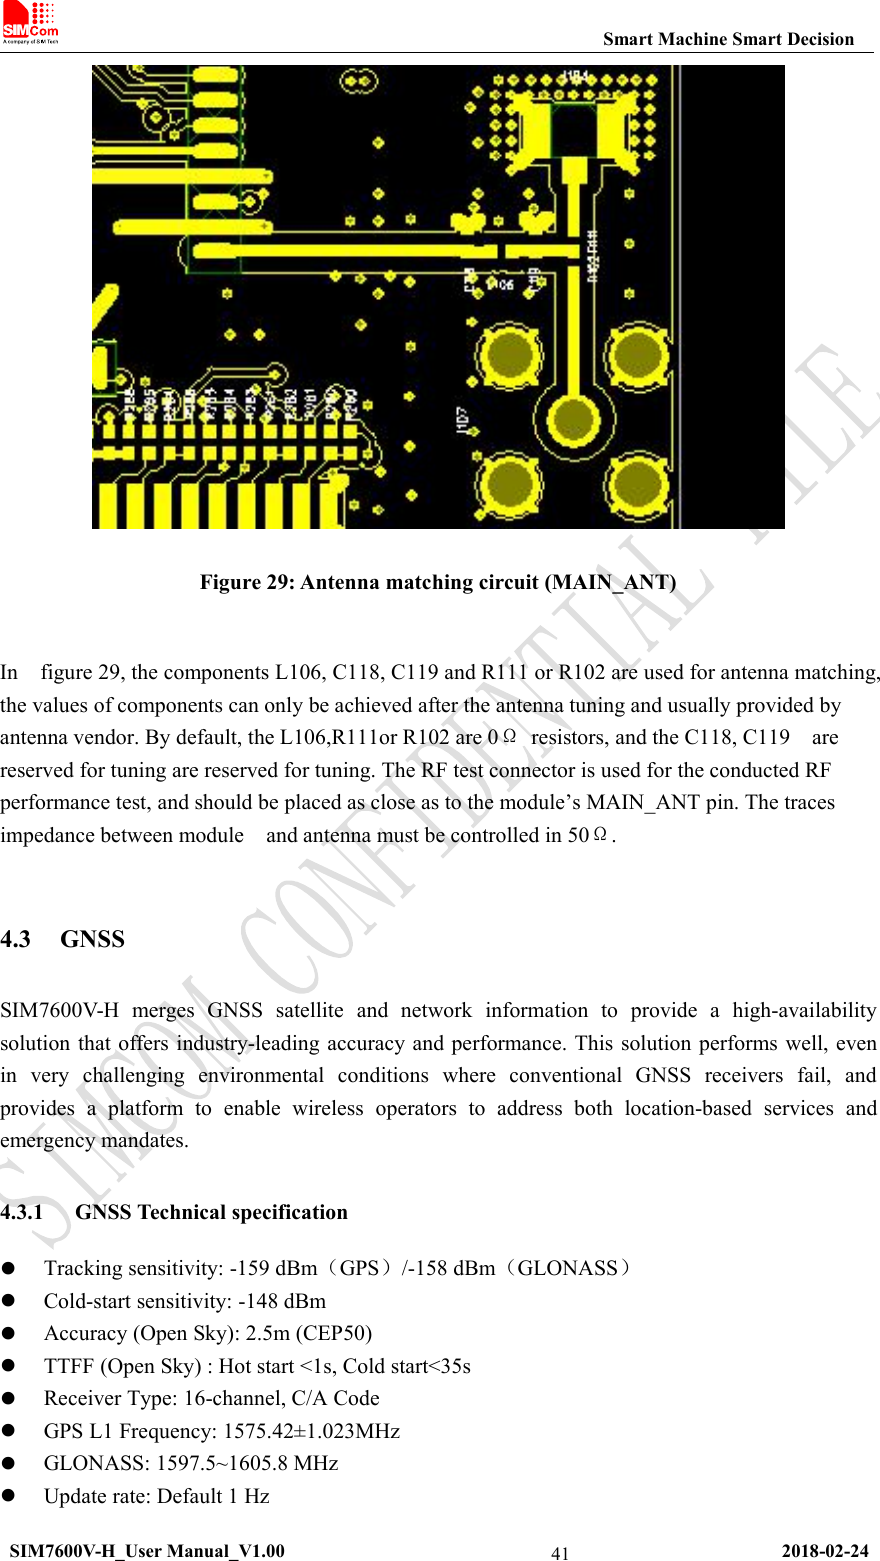 Smart Machine Smart DecisionSIM7600V-H_User Manual_V1.00 2018-02-2441Figure 29: Antenna matching circuit (MAIN_ANT)In figure 29, the components L106, C118, C119 and R111 or R102 are used for antenna matching,the values of components can only be achieved after the antenna tuning and usually provided byantenna vendor. By default, the L106,R111or R102 are 0Ωresistors, and the C118, C119 arereserved for tuning are reserved for tuning. The RF test connector is used for the conducted RFperformance test, and should be placed as close as to the module’s MAIN_ANT pin. The tracesimpedance between module and antenna must be controlled in 50Ω.4.3 GNSSSIM7600V-H merges GNSS satellite and network information to provide a high-availabilitysolution that offers industry-leading accuracy and performance. This solution performs well, evenin very challenging environmental conditions where conventional GNSS receivers fail, andprovides a platform to enable wireless operators to address both location-based services andemergency mandates.4.3.1 GNSS Technical specificationTracking sensitivity: -159 dBm（GPS）/-158 dBm（GLONASS）Cold-start sensitivity: -148 dBmAccuracy (Open Sky): 2.5m (CEP50)TTFF (Open Sky) : Hot start &lt;1s, Cold start&lt;35sReceiver Type: 16-channel, C/A CodeGPS L1 Frequency: 1575.42±1.023MHzGLONASS: 1597.5~1605.8 MHzUpdate rate: Default 1 Hz